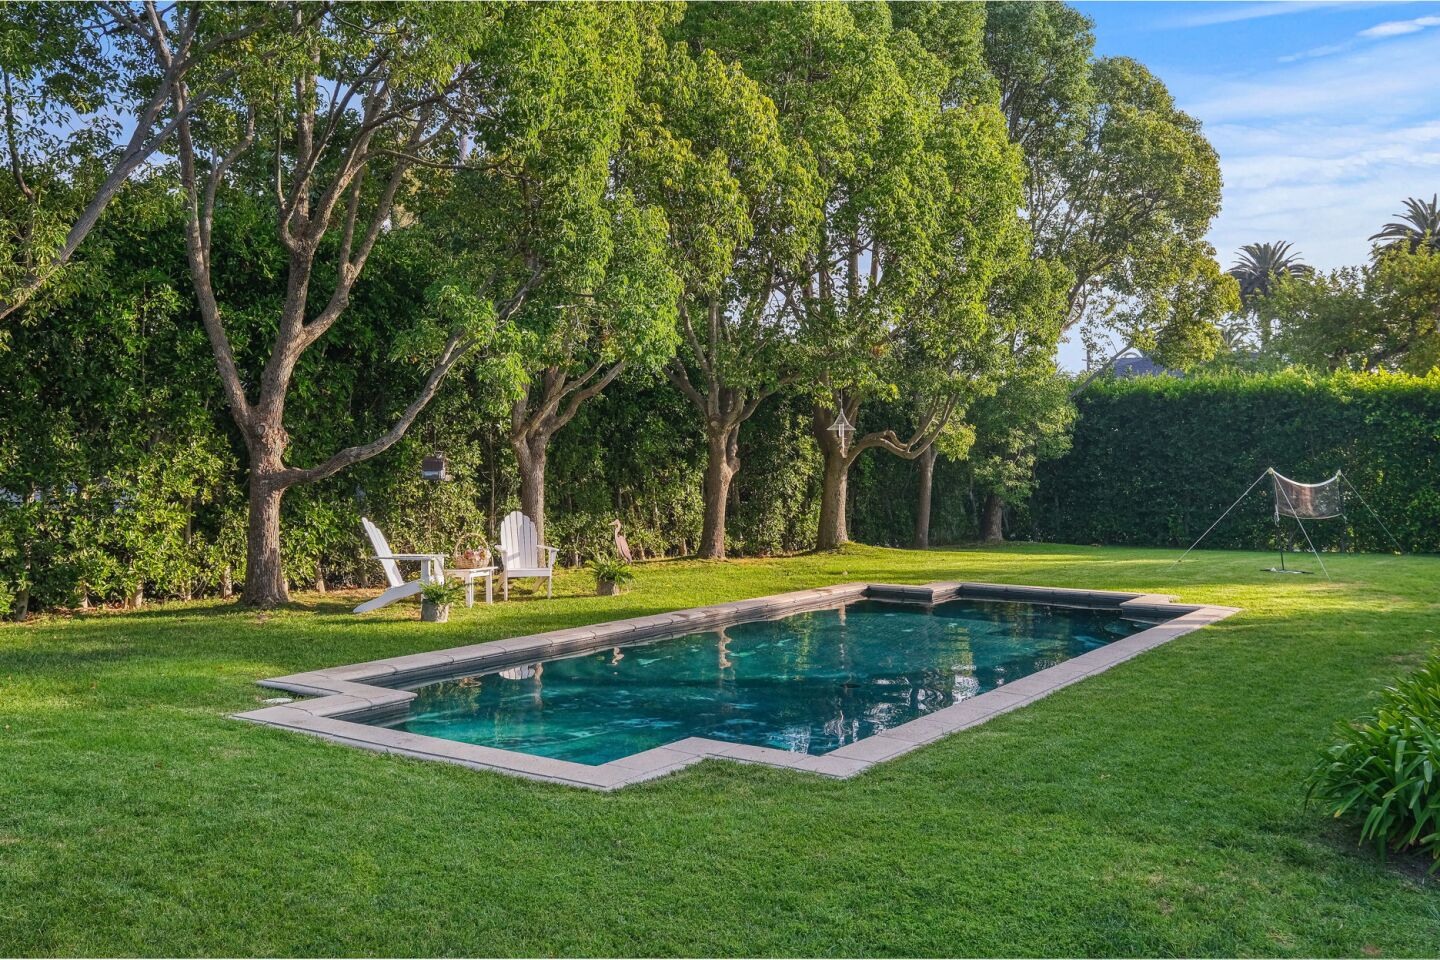 ‘Charlie’s Angels’ star Shelley Hack sells home for $11.4 million - Los ...